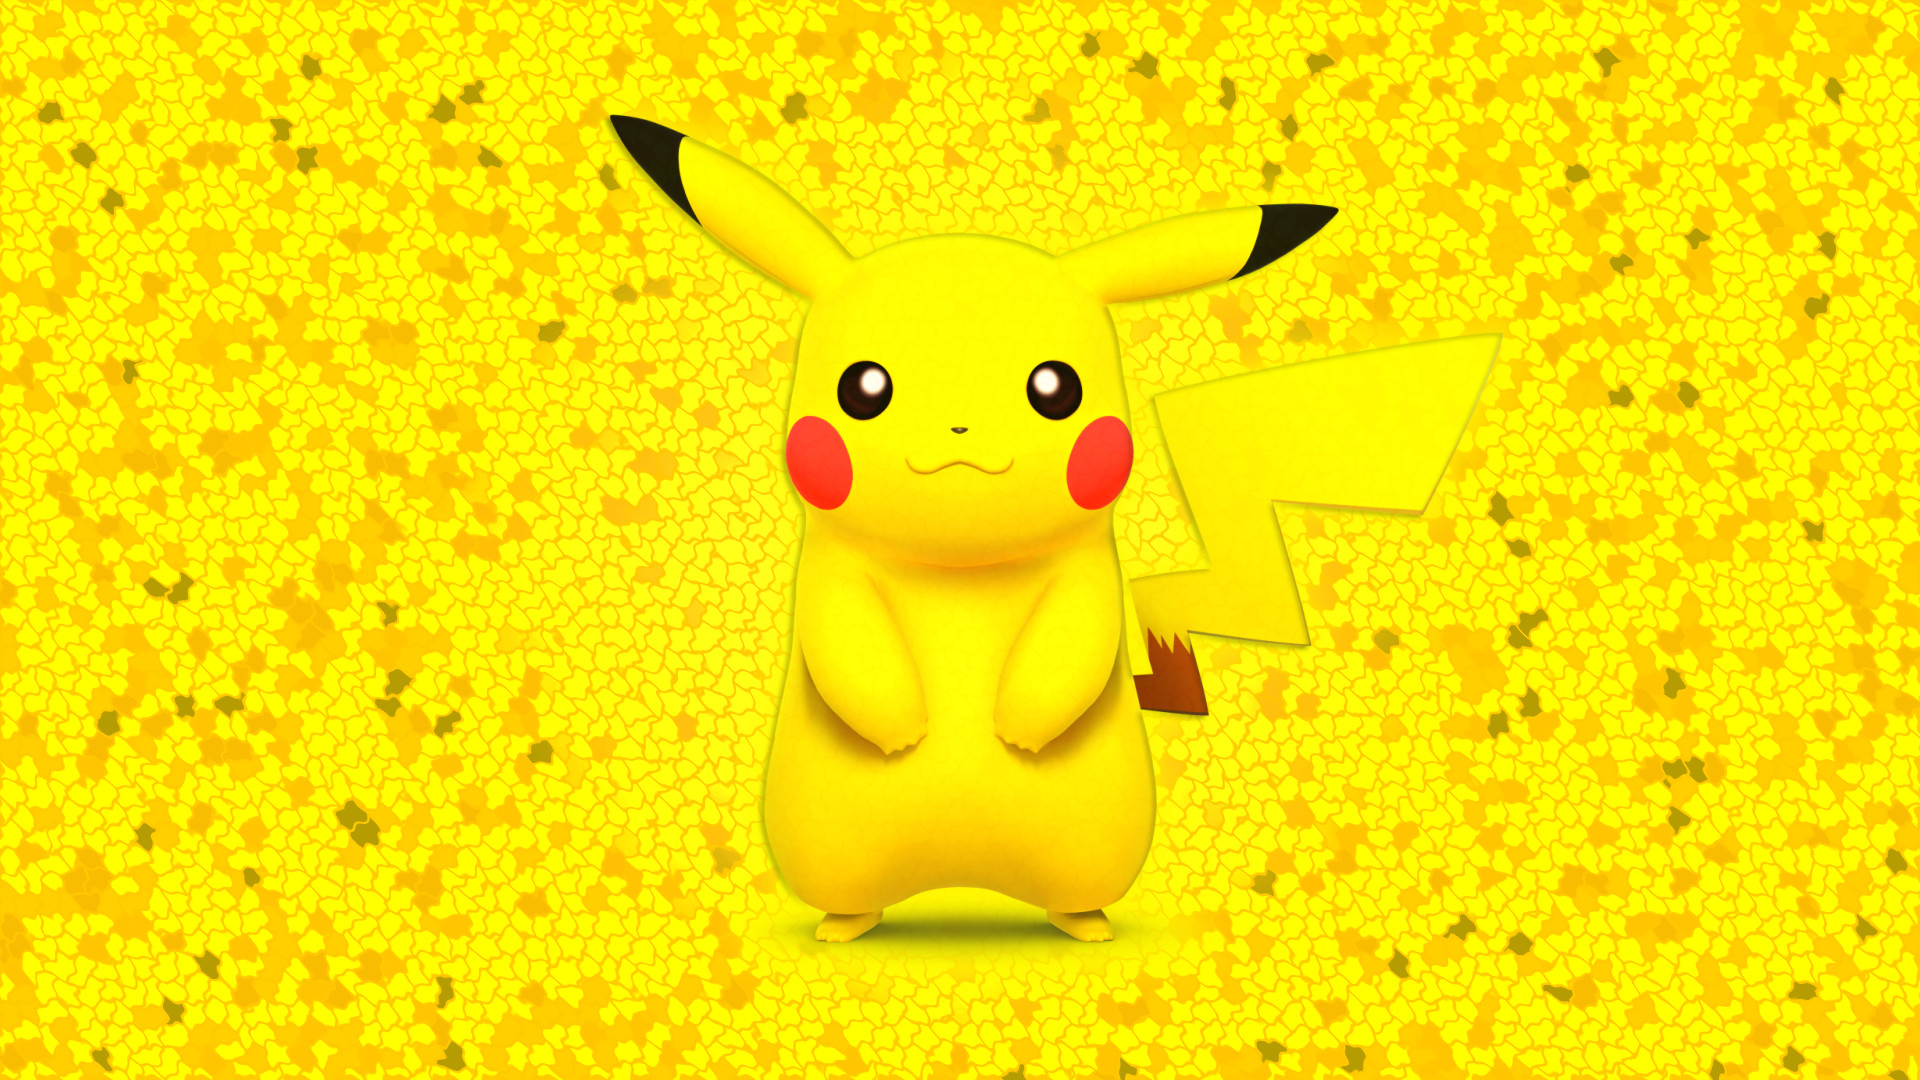 Pikachu Wallpapers for Computer (64+ images)